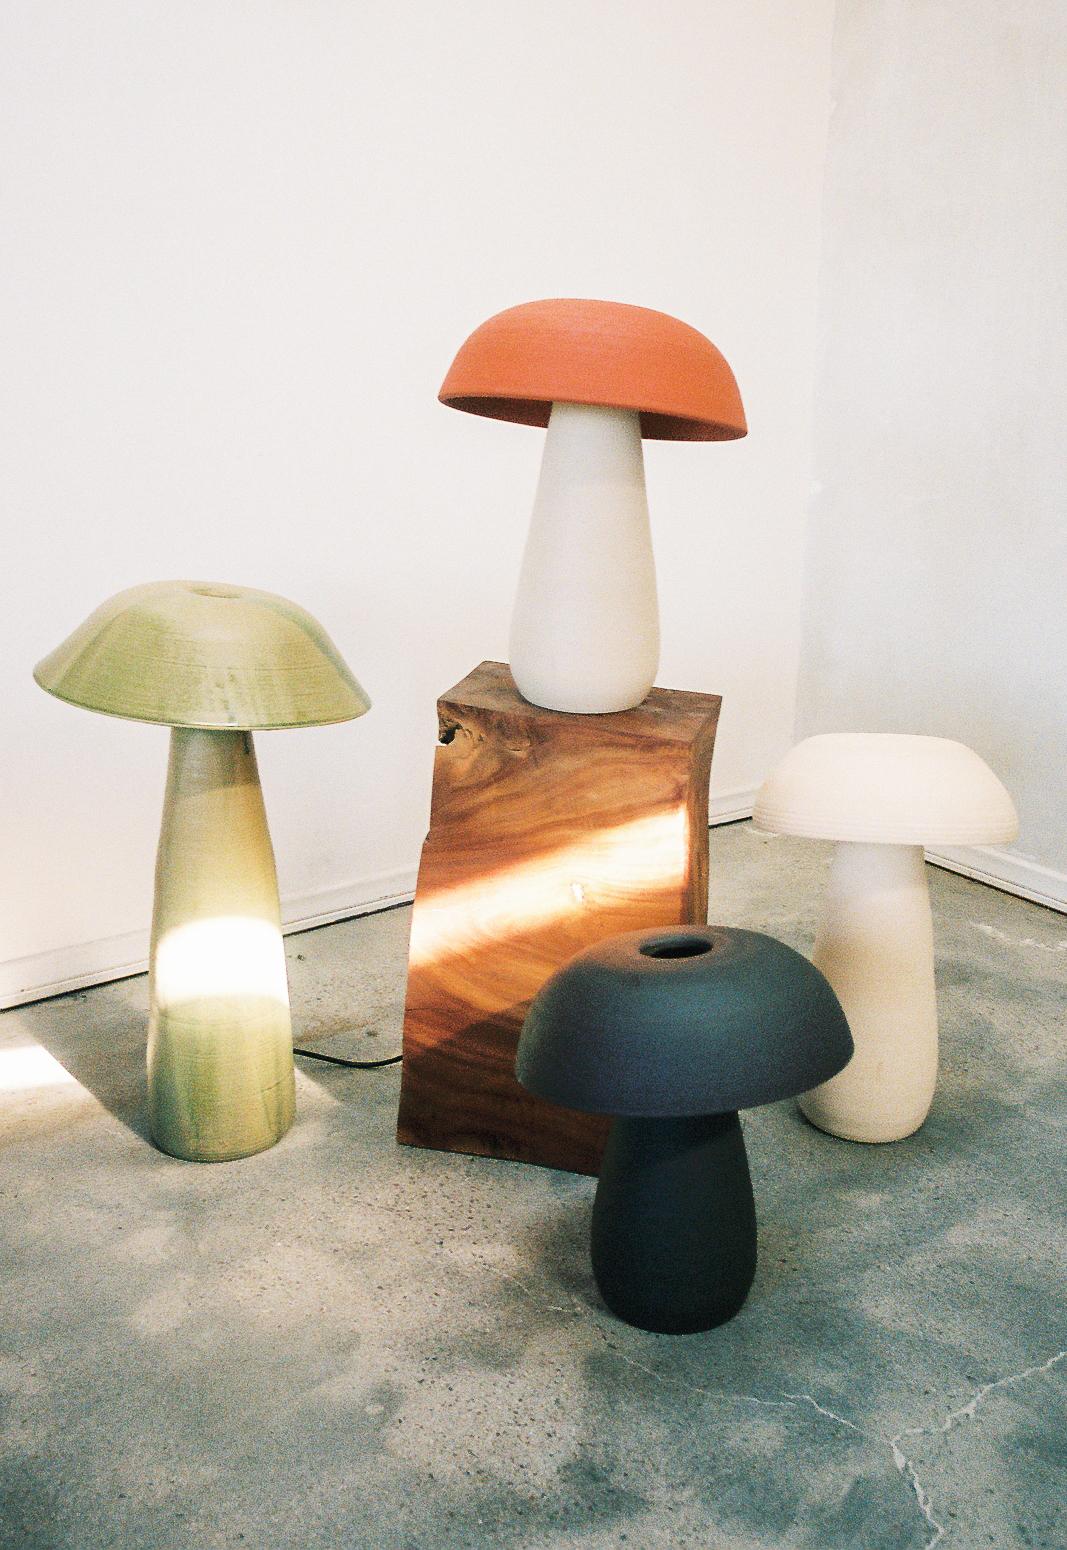 Set of 4 Mushroom Lamps by Nick Pourfard
Dimensions: Small (x3) Ø 33 x H 38 cm.
Medium (x1) Ø 38 x H 56 cm.
Materials: ceramic.
Different finishes available. Please contact us.

All our lamps can be wired according to each country. If sold to the